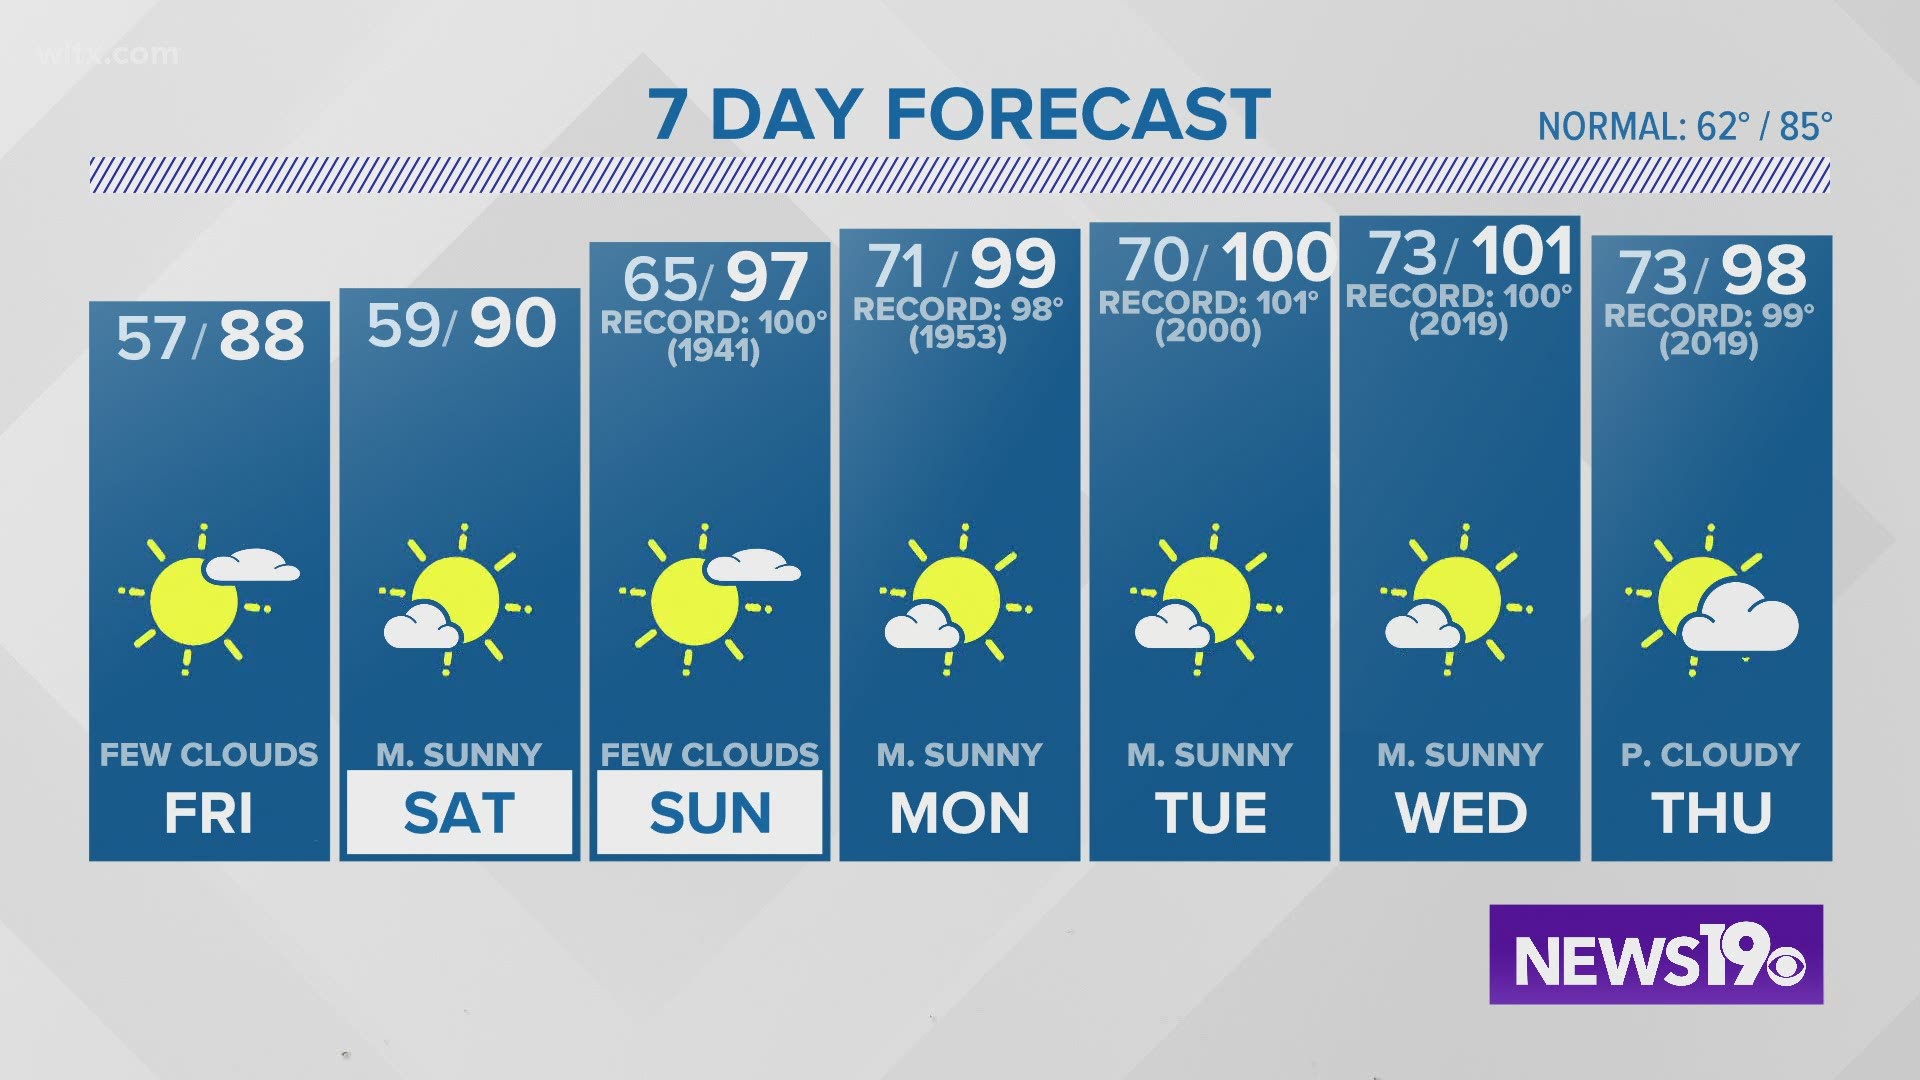 As The Midlands continue to enjoy sunny skies, hotter temperatures return and last for several days with high temperatures reaching 100 degrees next week.